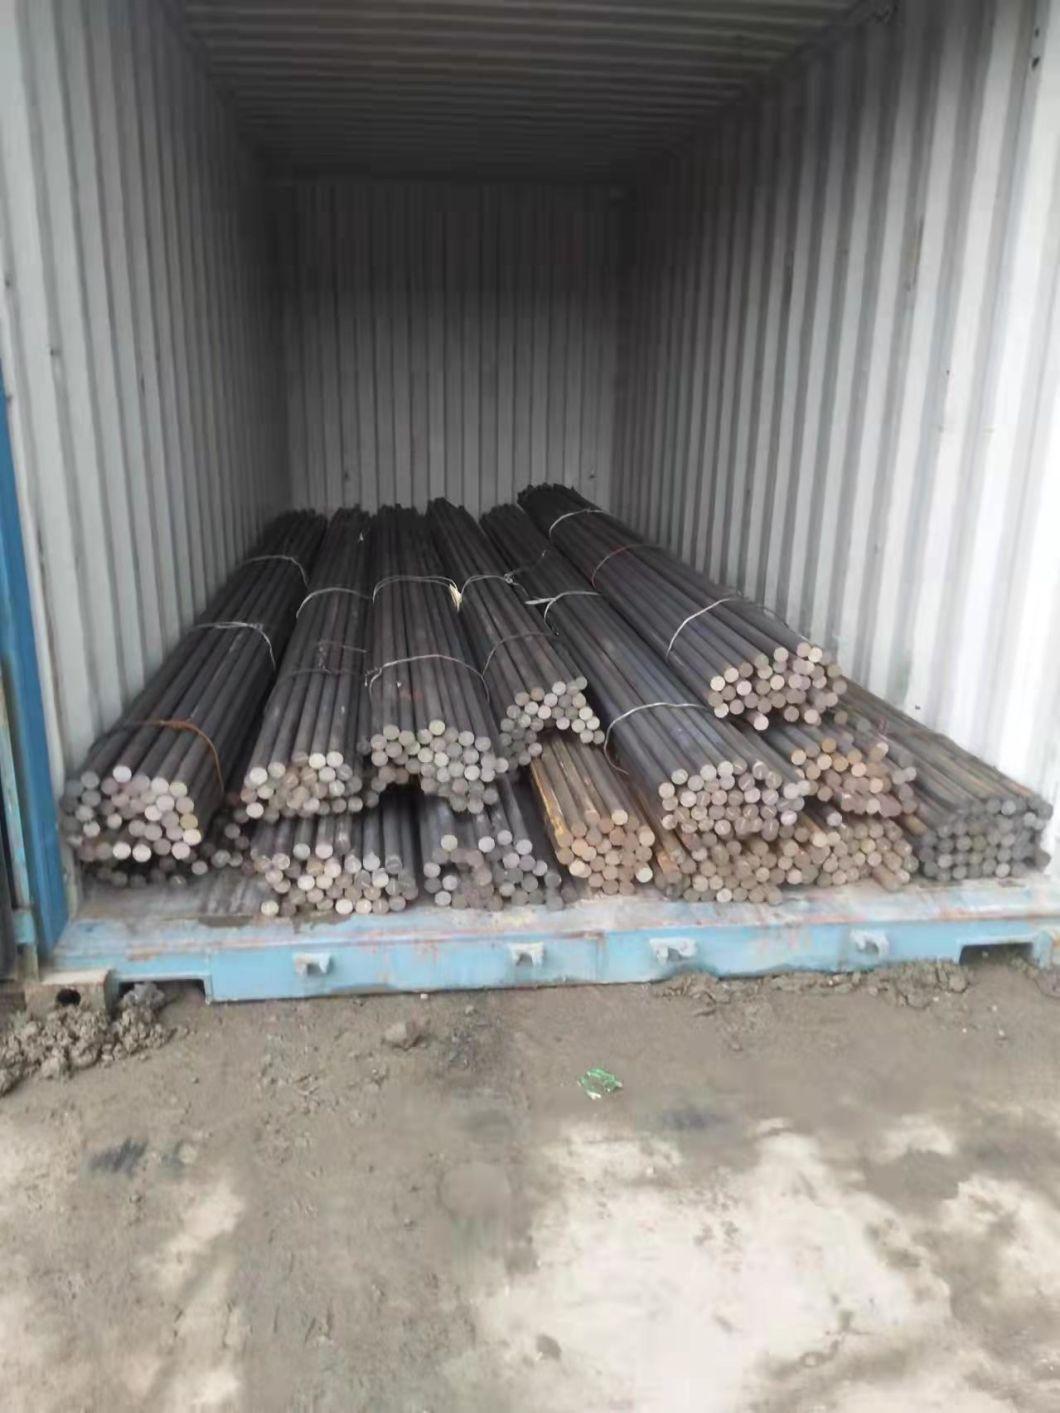 AISI 4140 1060 C45 1020 A36 Q235 SAE 1016 Low Round Carbon Steel Bars